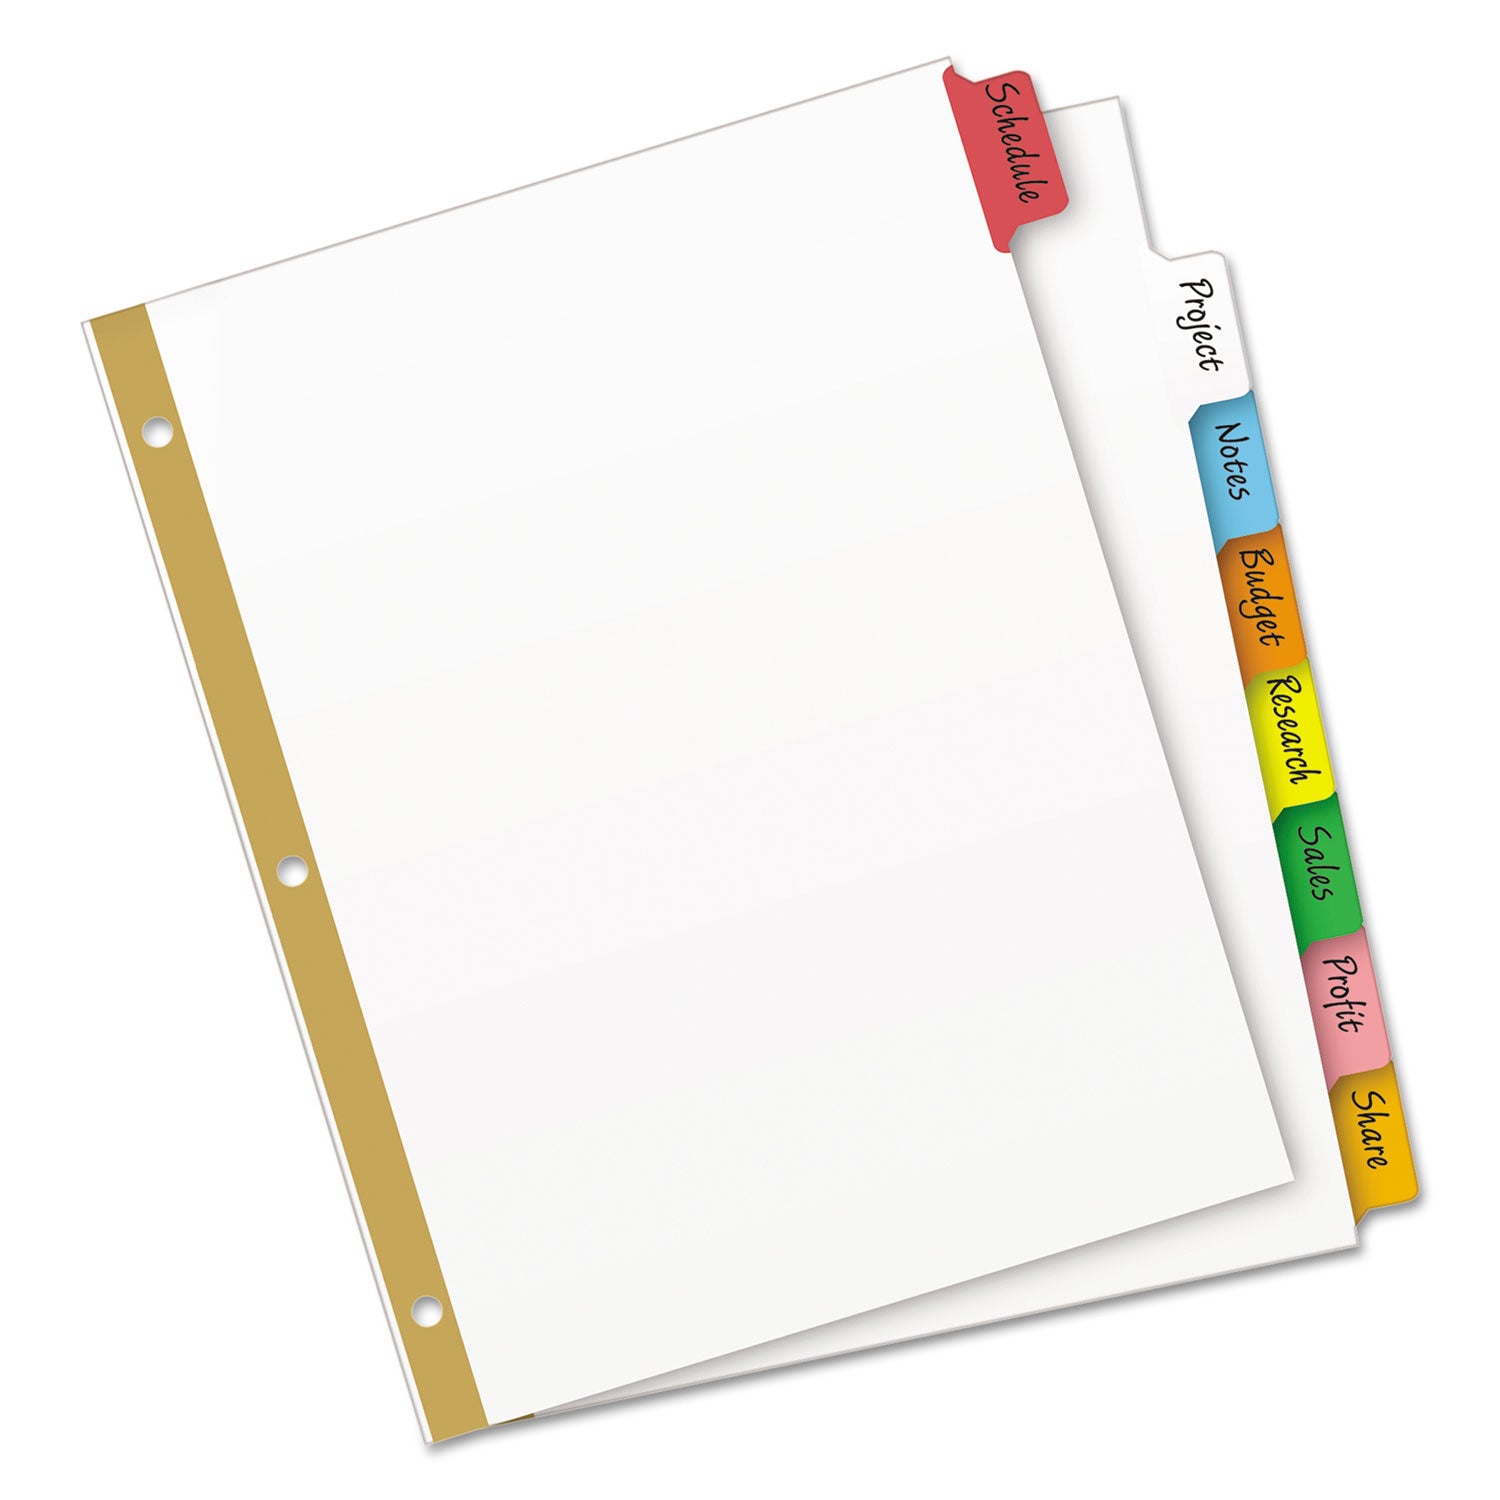 Write and Erase Big Tab Paper Dividers, 8-Tab, 11 x 8.5, White, Assorted Tabs,1 Set - 